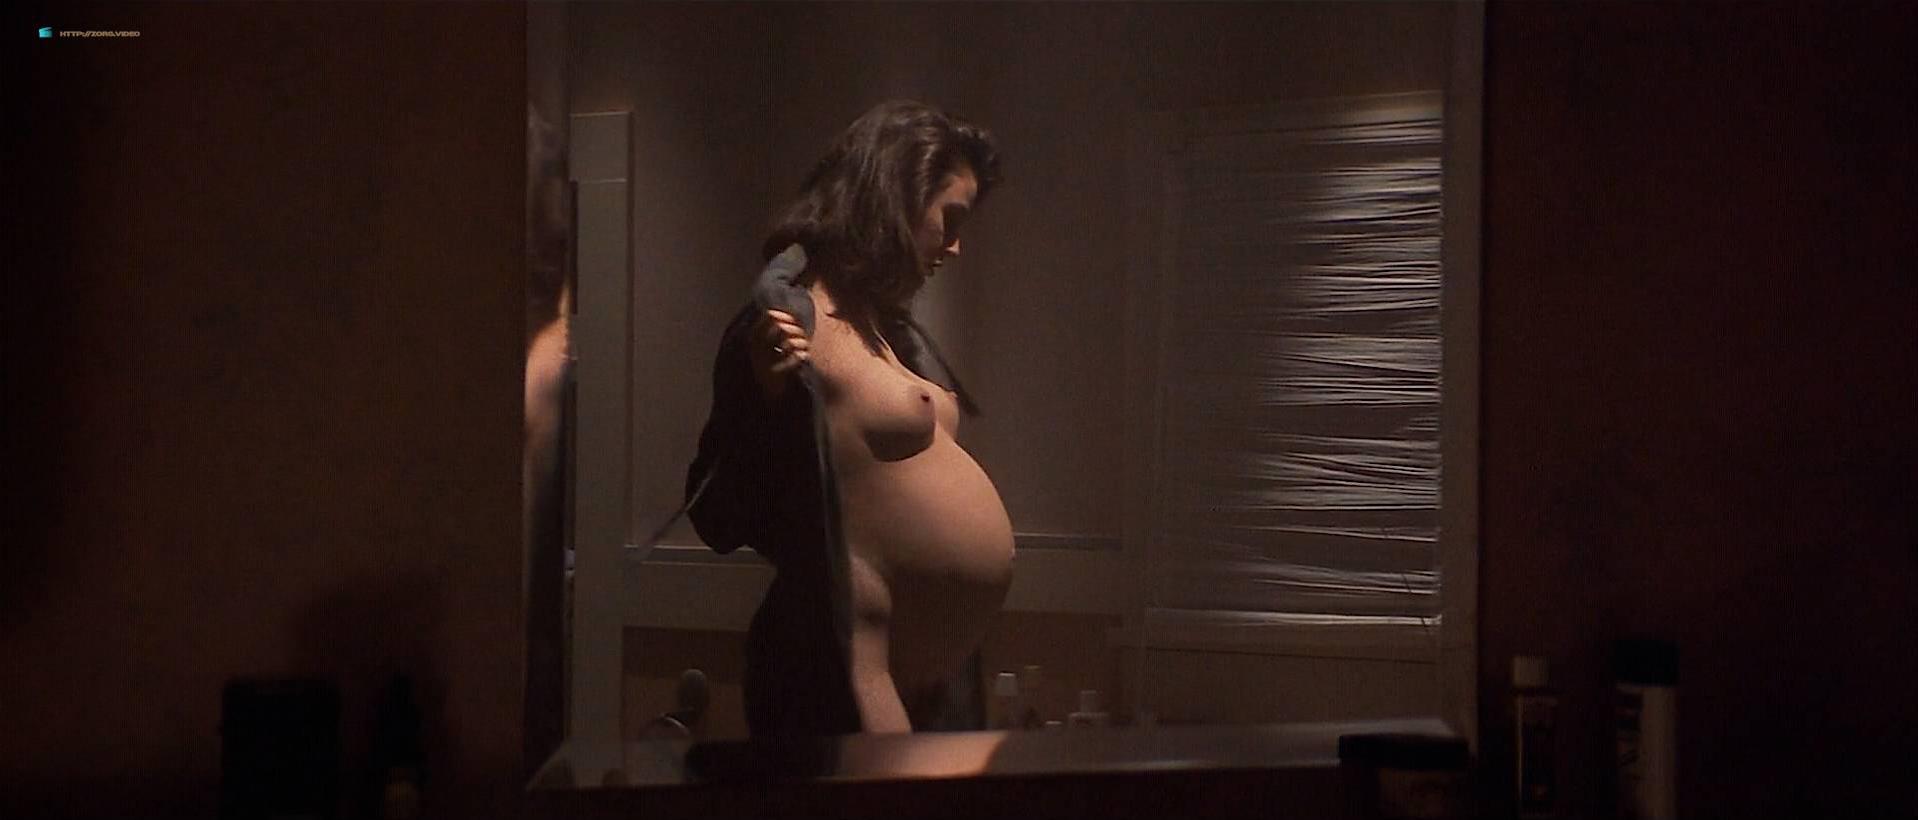 Demi moore nude movies